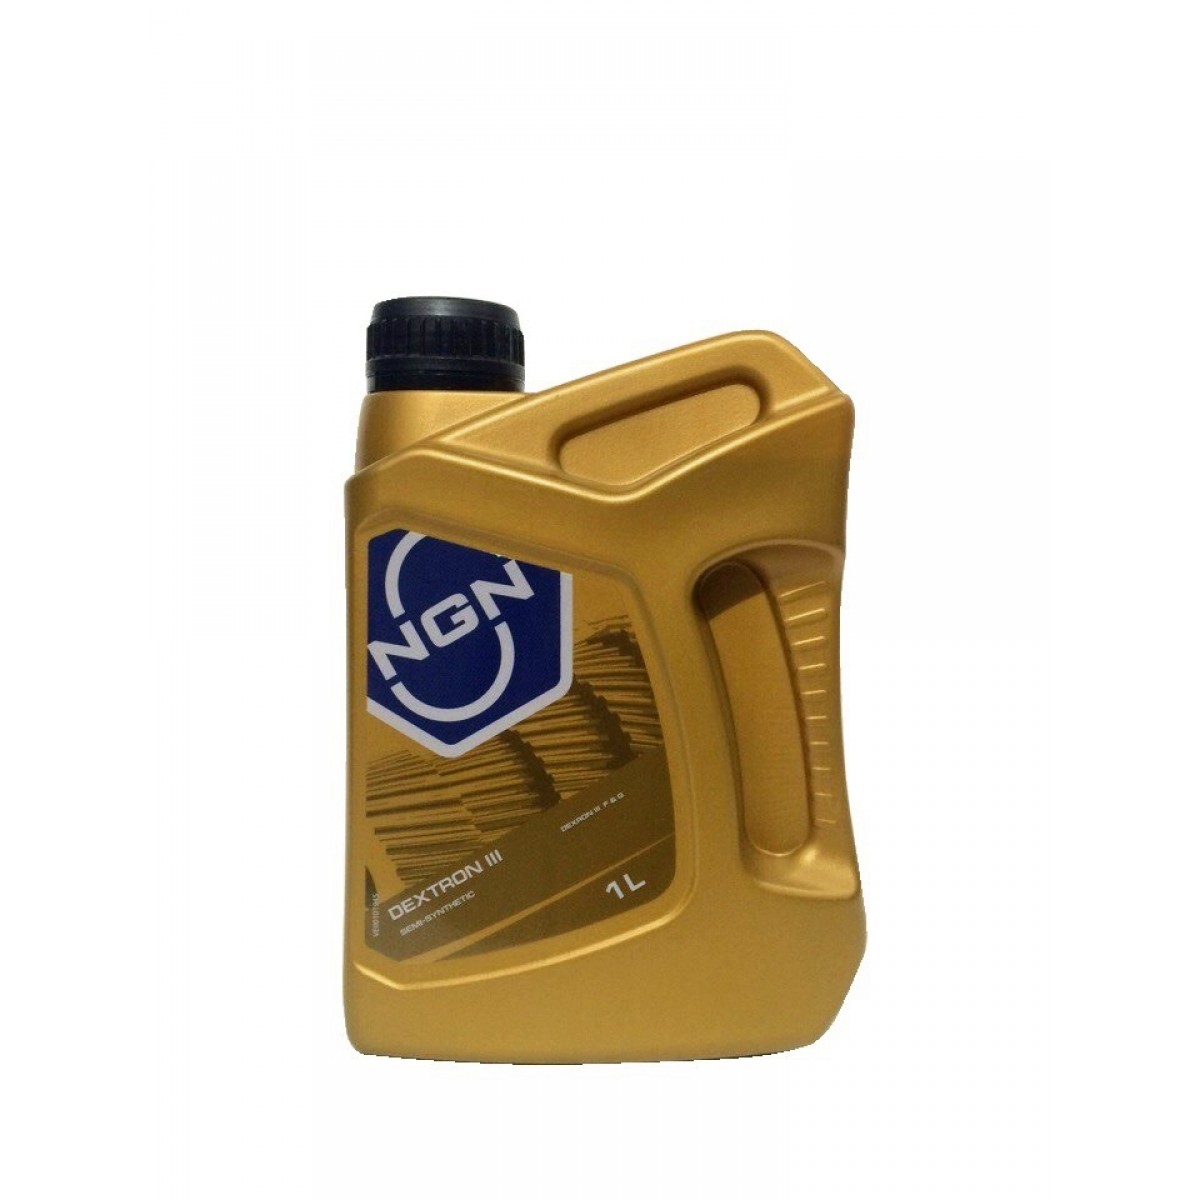 Масло акпп ngn. NGN Gold 5w-40. 5w-40 Gold SN/CF 4л (синт. Мотор. Масло) NGN. Моторное масло NGN 5w40. 5w30 Profi SN/CF NGN.